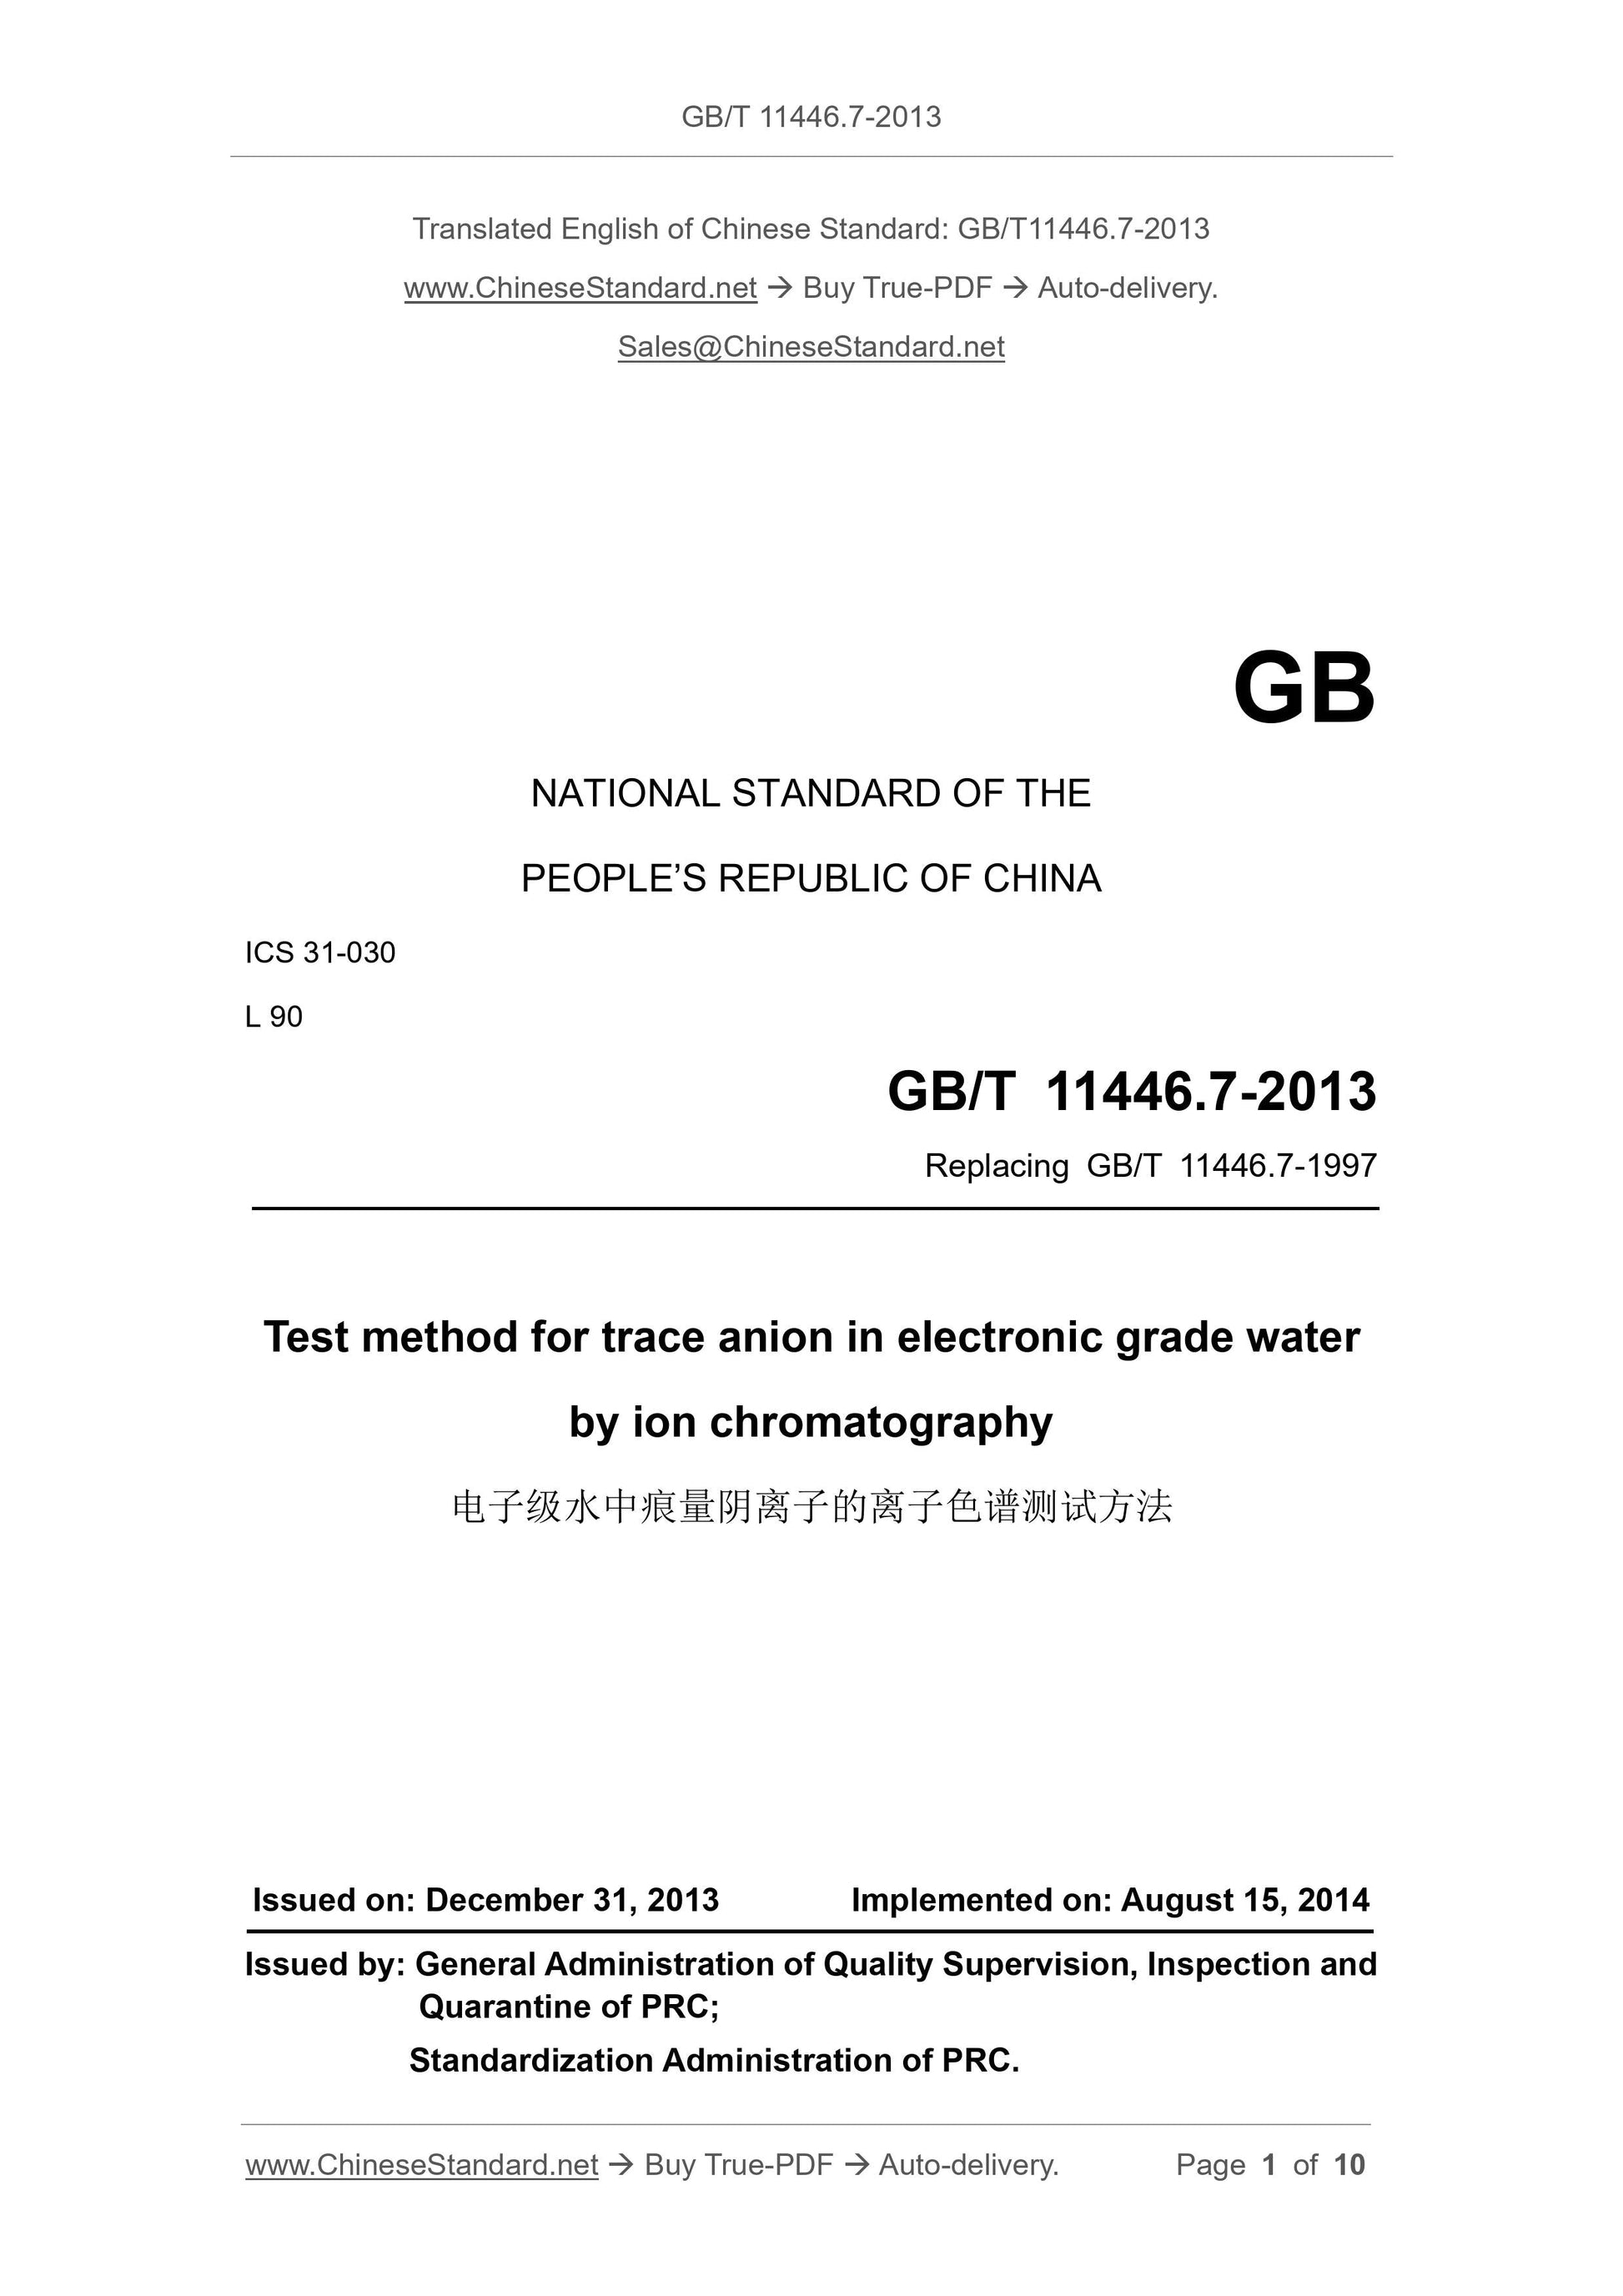 GB/T 11446.7-2013 Page 1